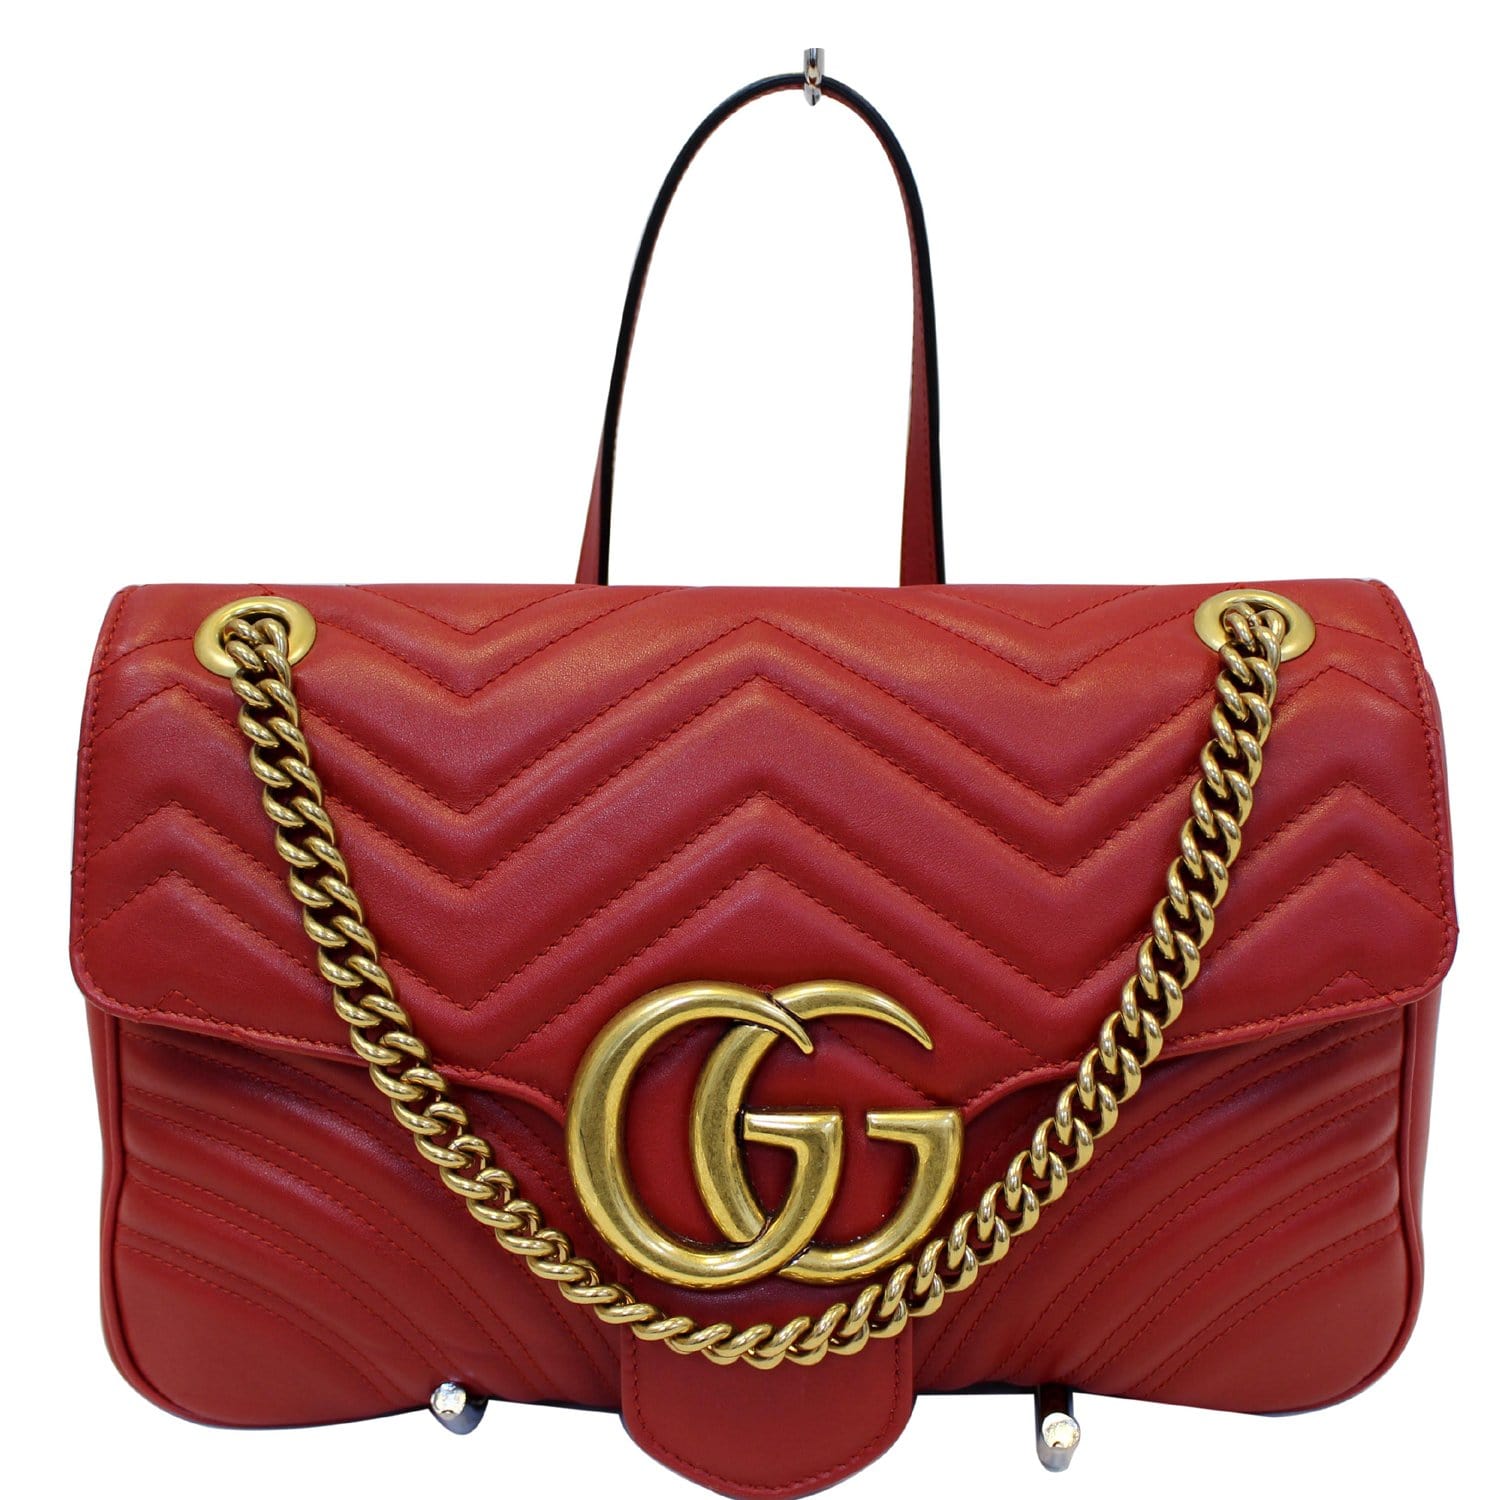 How To Tell If GG Marmont Bag is Real